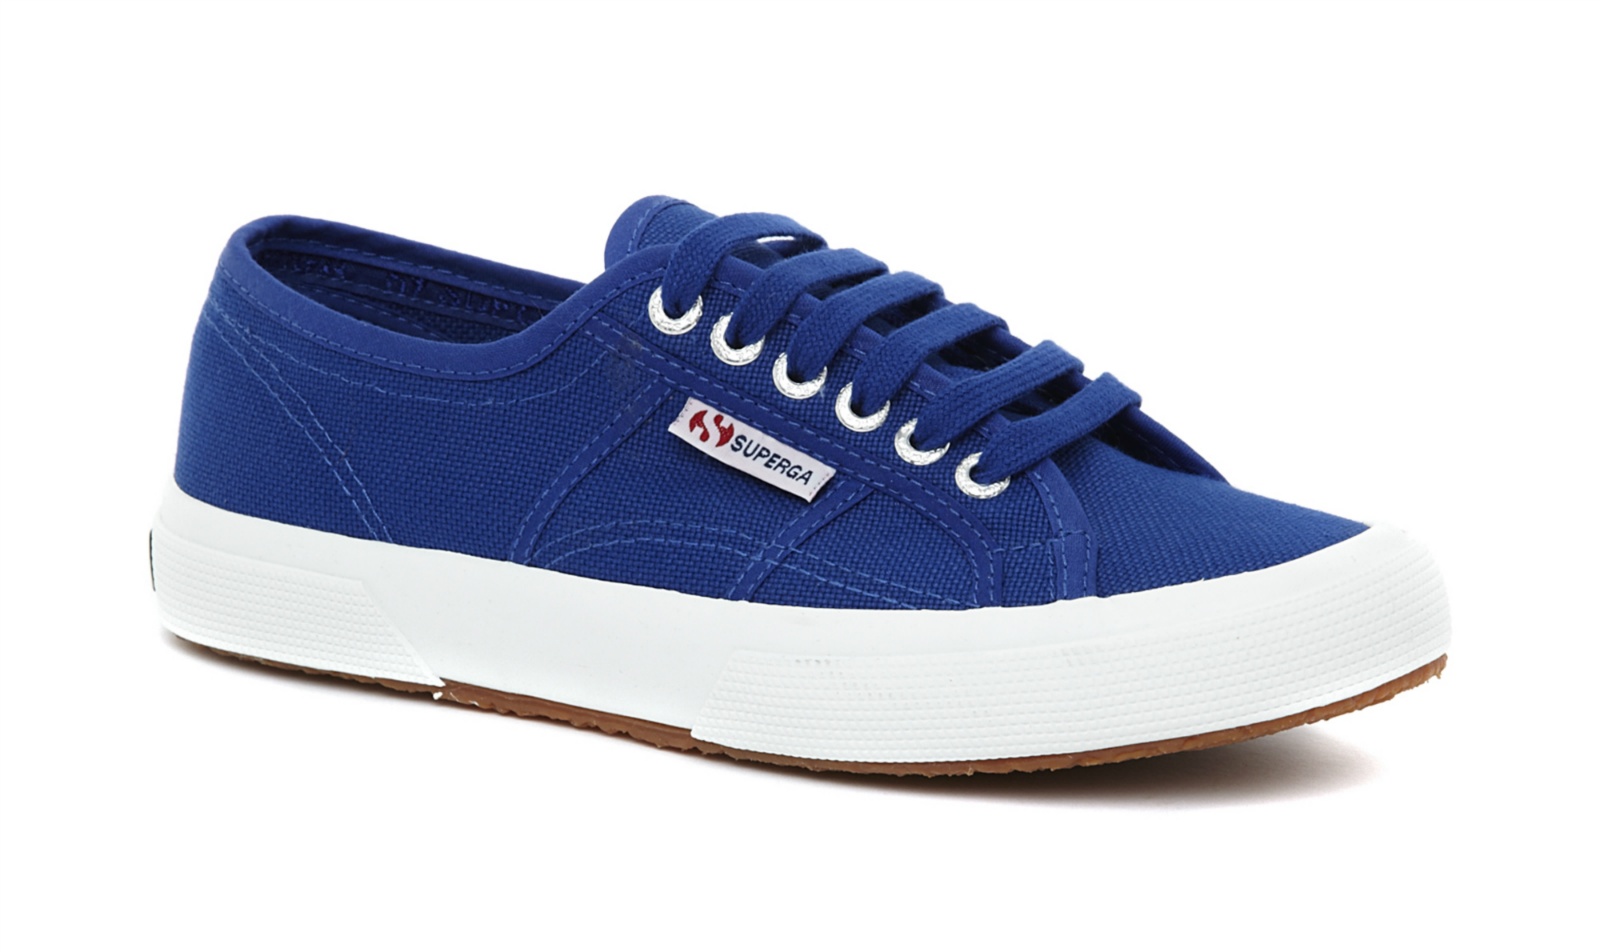 Are Superga shoes expensive?